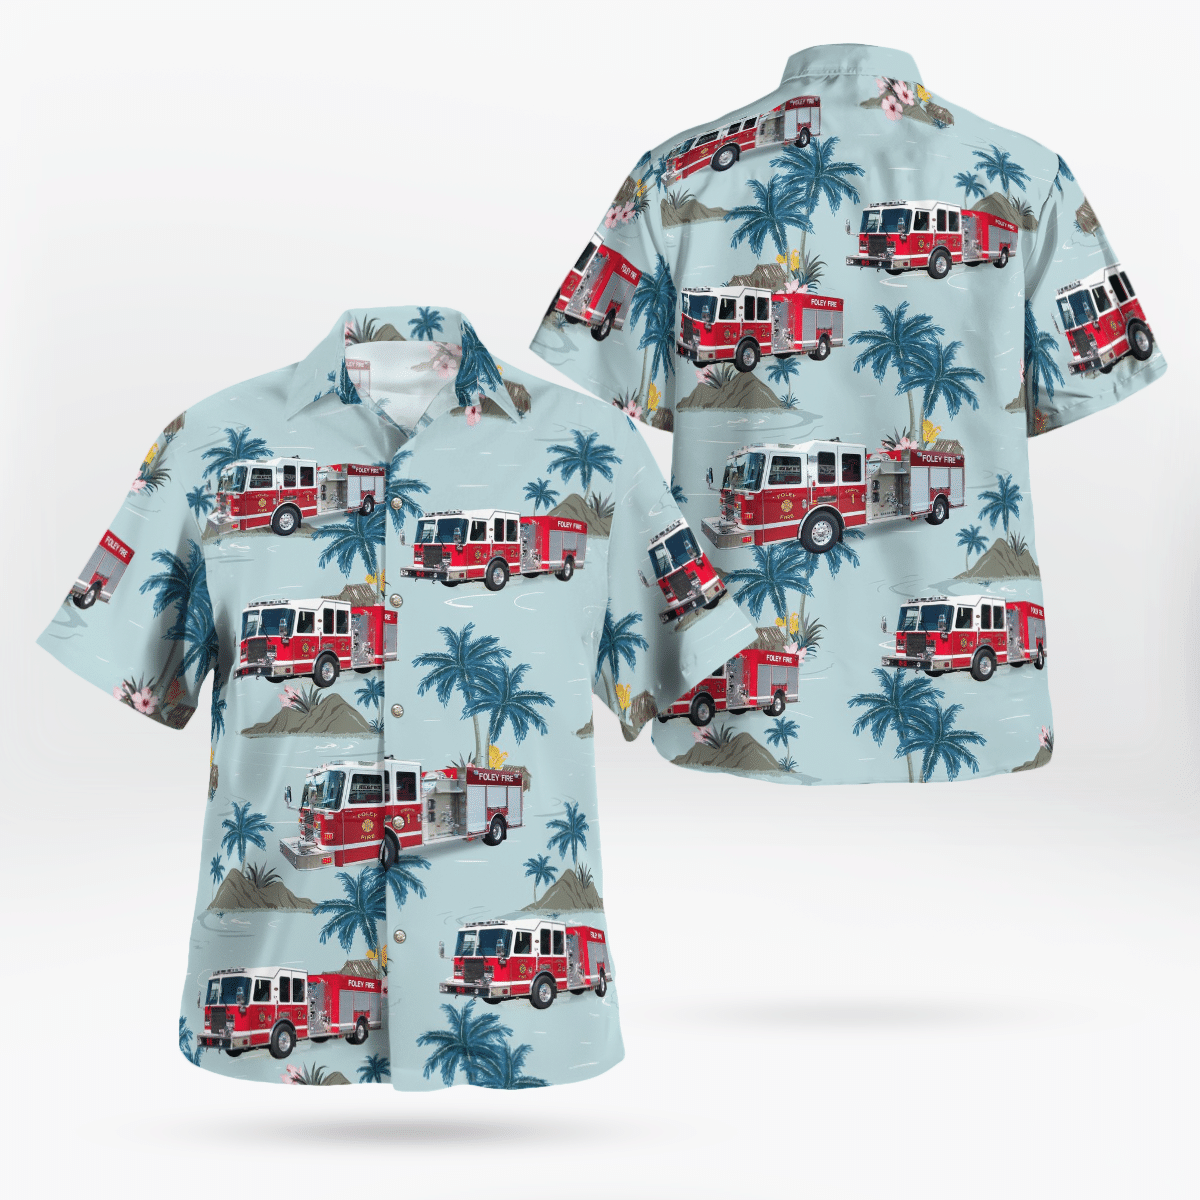 Shop now to find the perfect Hawaii Shirt for your hobby 190